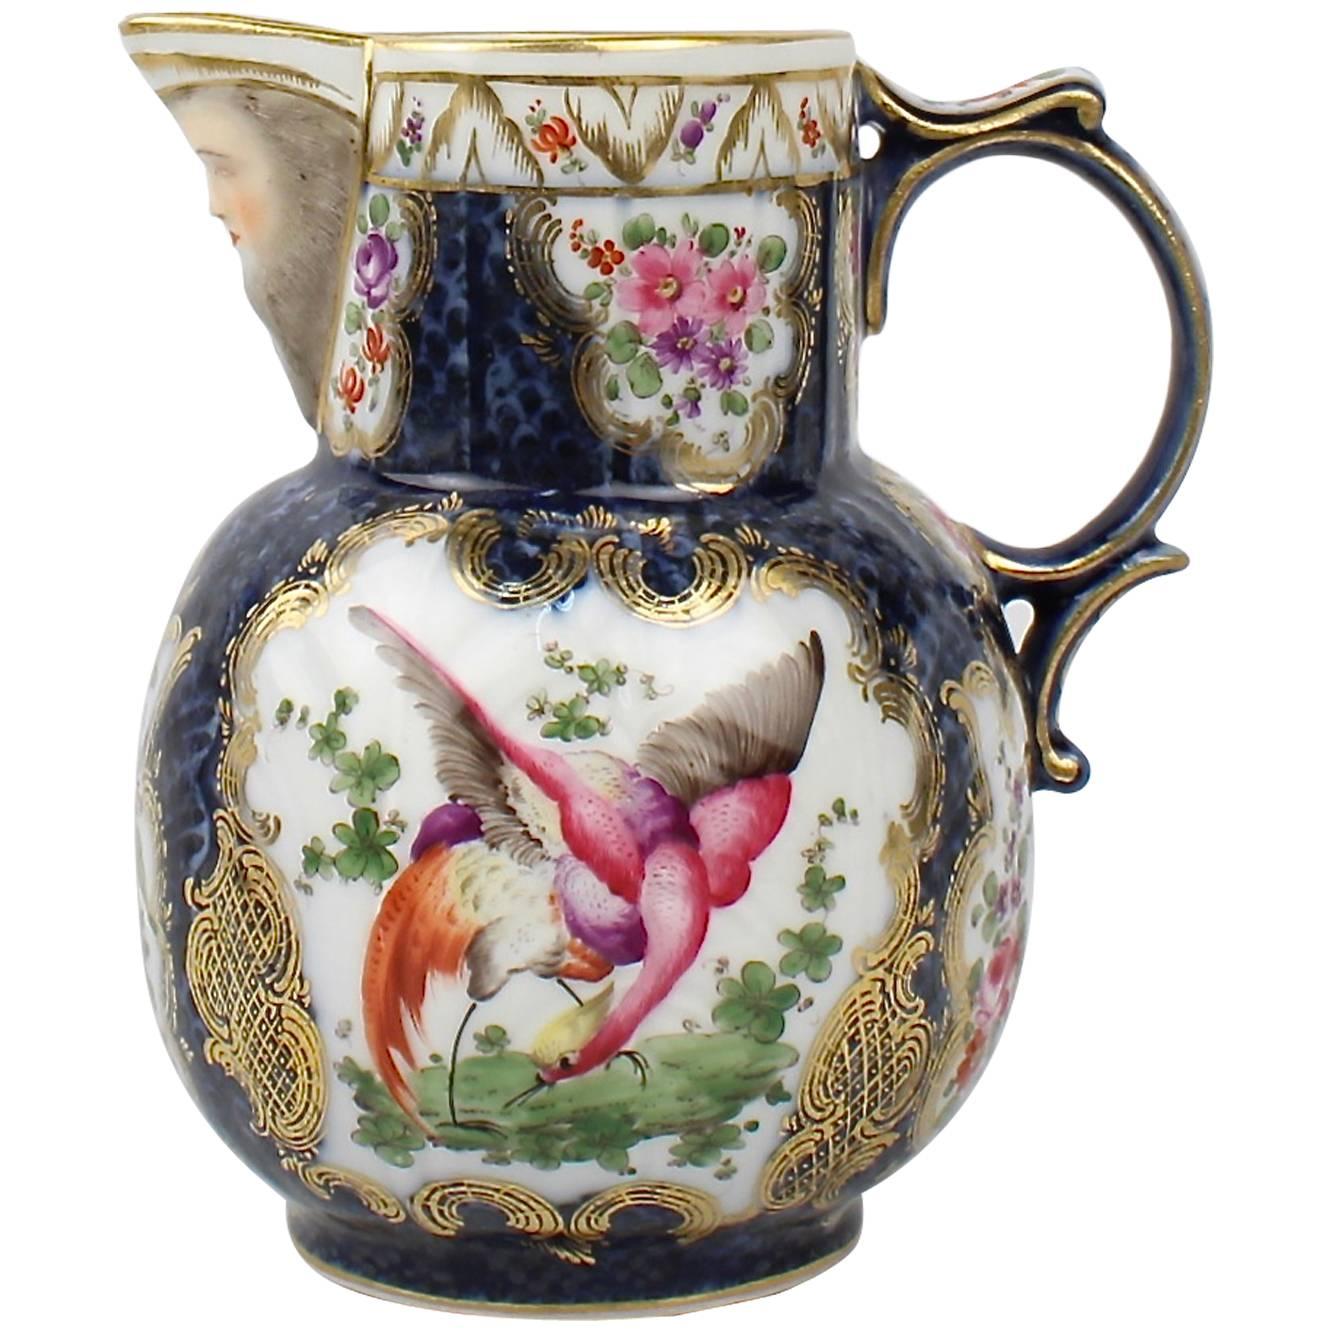 19th Century Samsom Porcelain Copy of a Worcester Pitcher with Exotic Birds